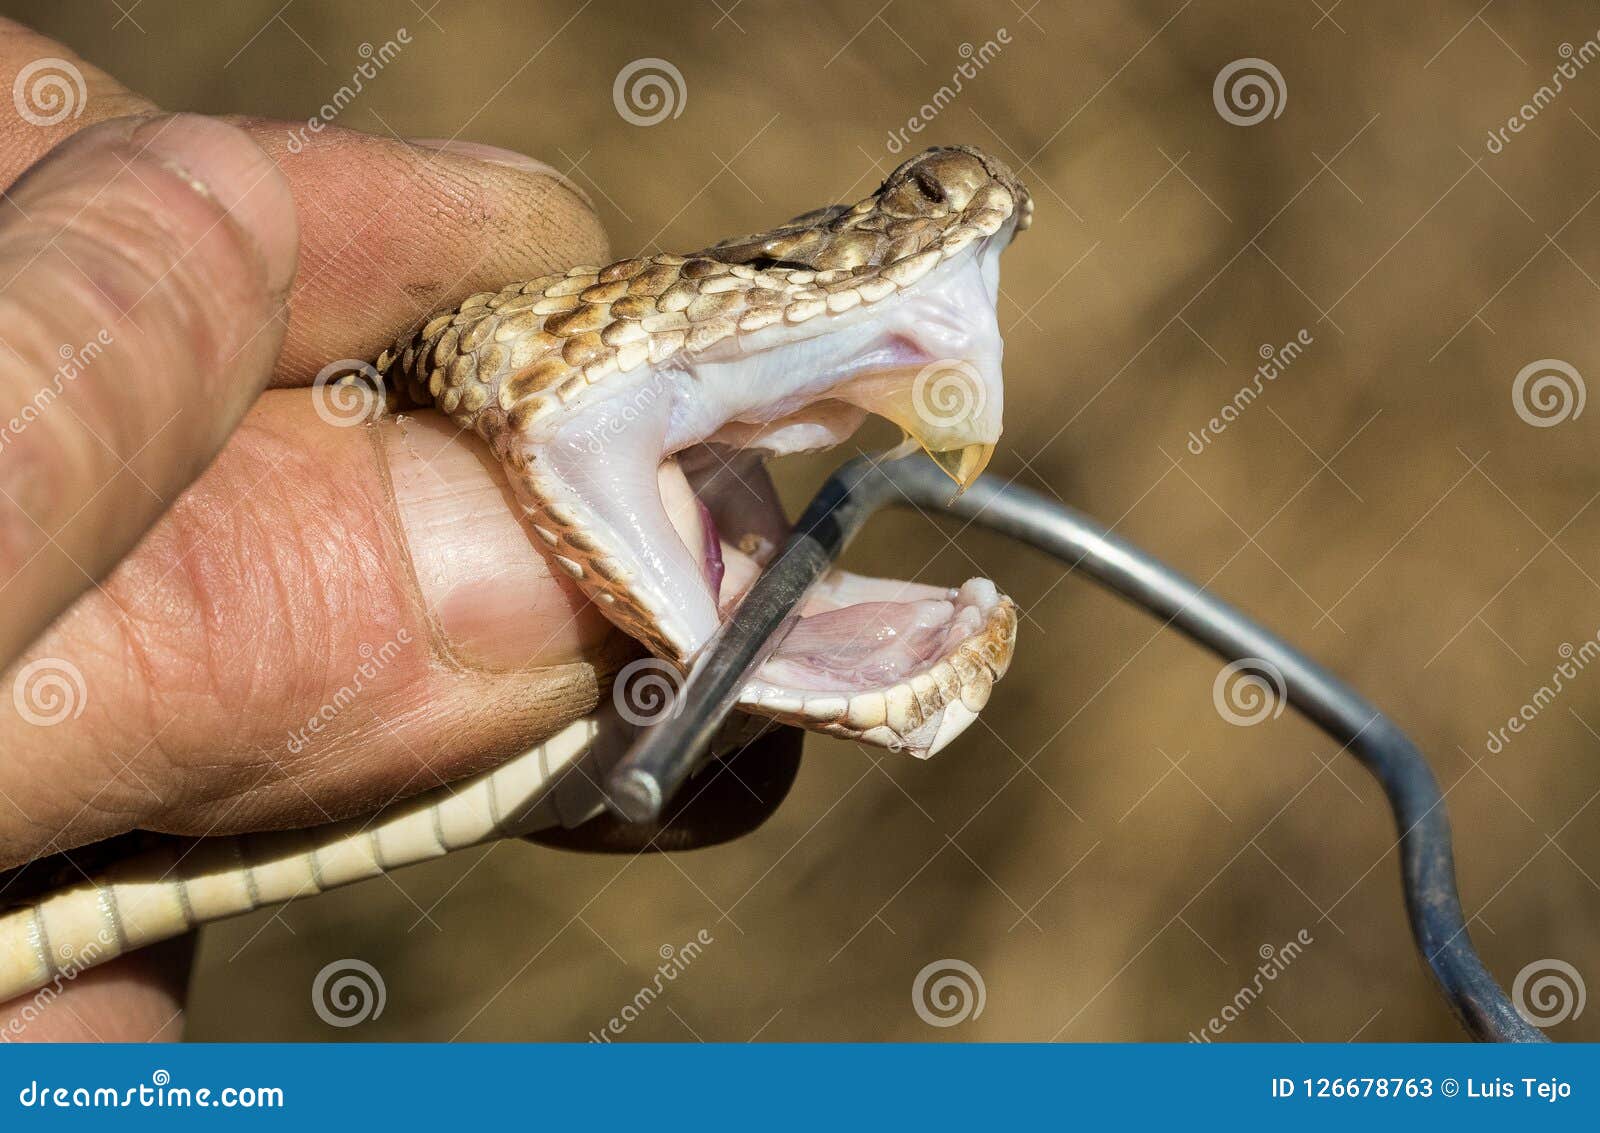 the venom and fangs of a venomous snake